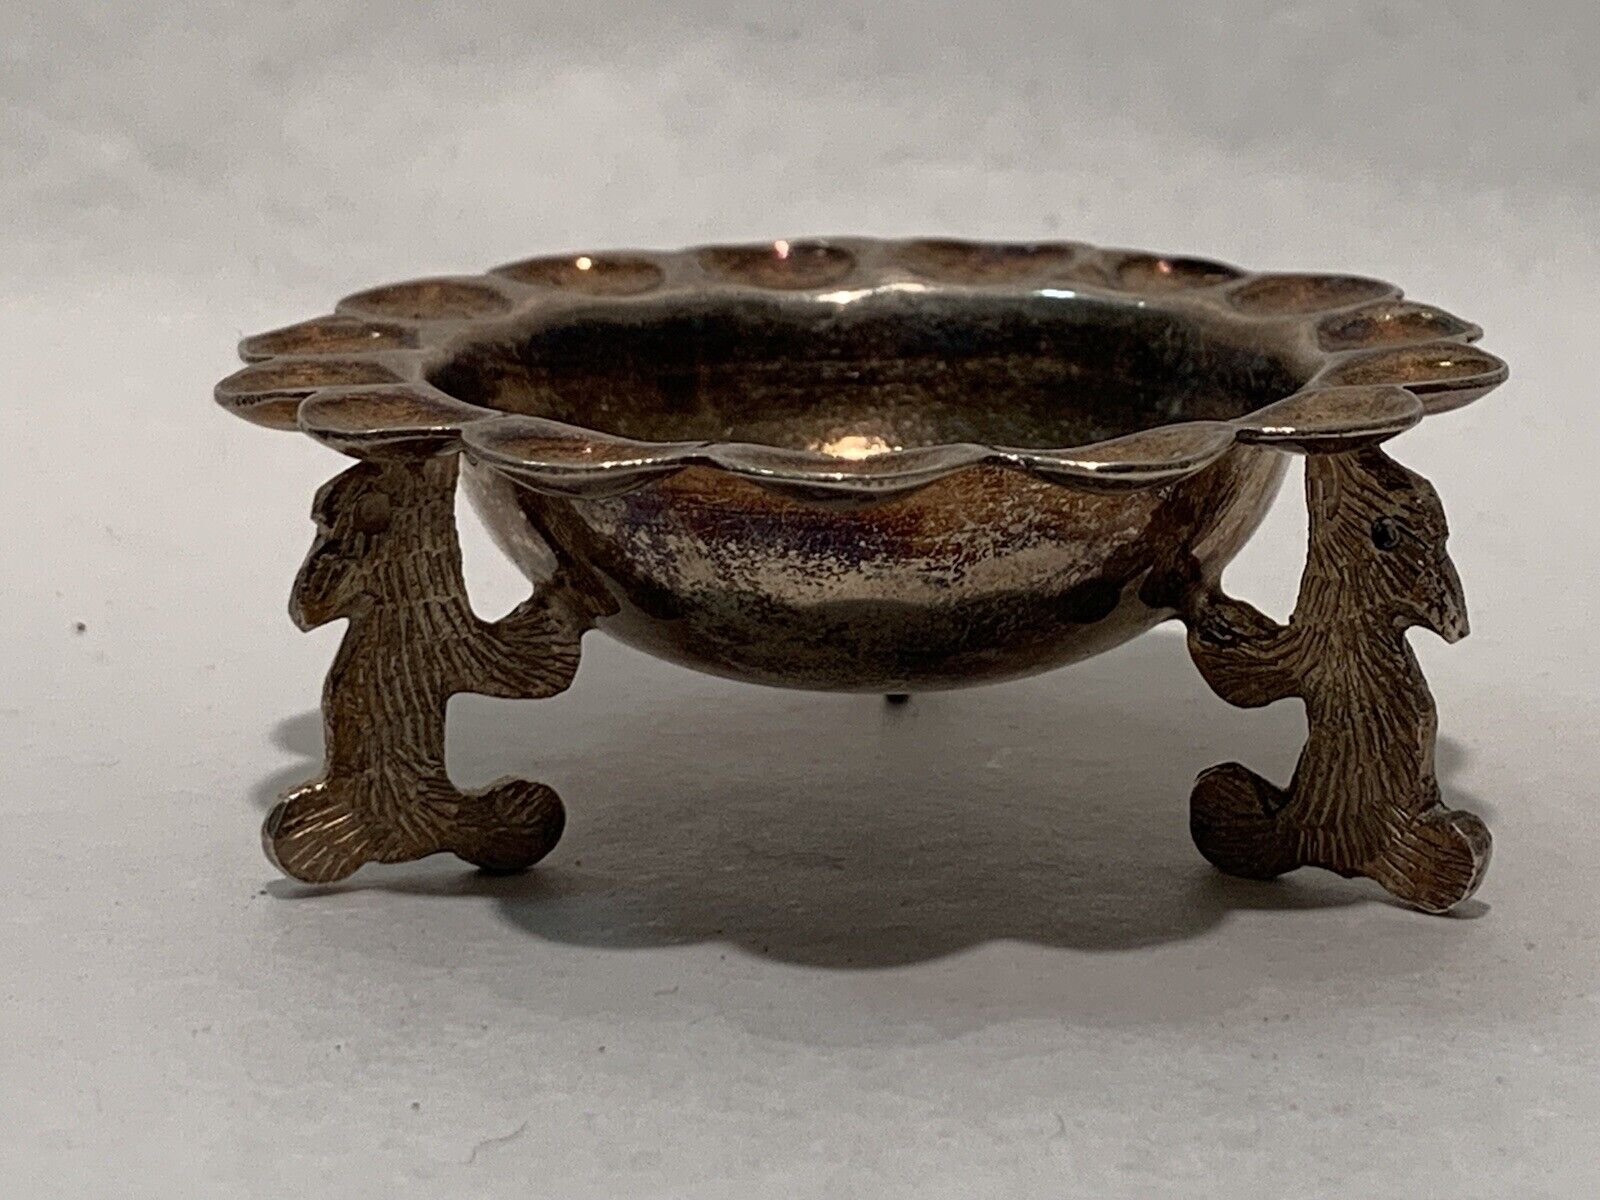 Antique SANBORNS Mexican Sterling Silver Dog Footed Ashtray / Salt Cellar 2 1/2”